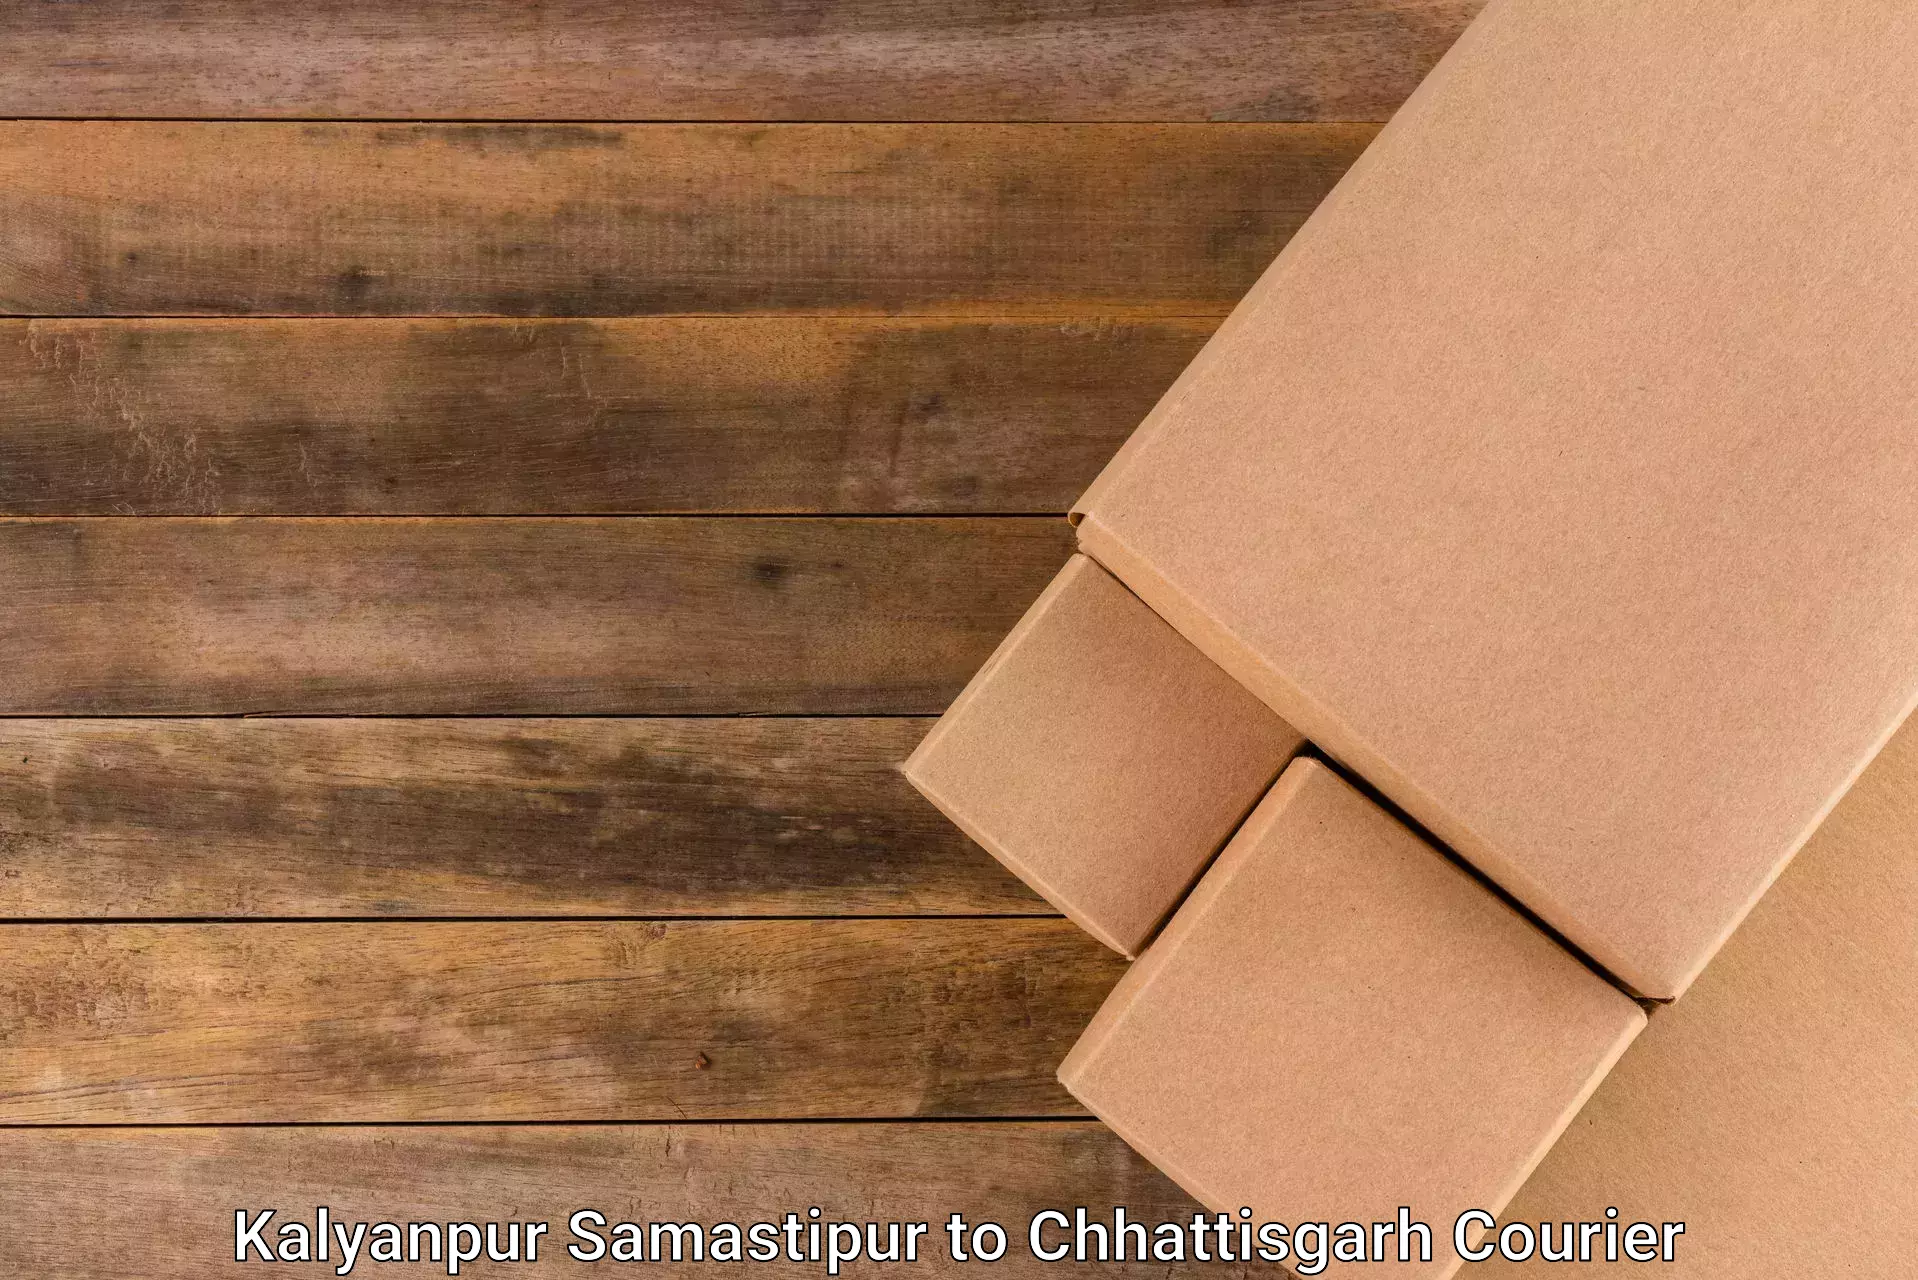 State-of-the-art courier technology in Kalyanpur Samastipur to Korba